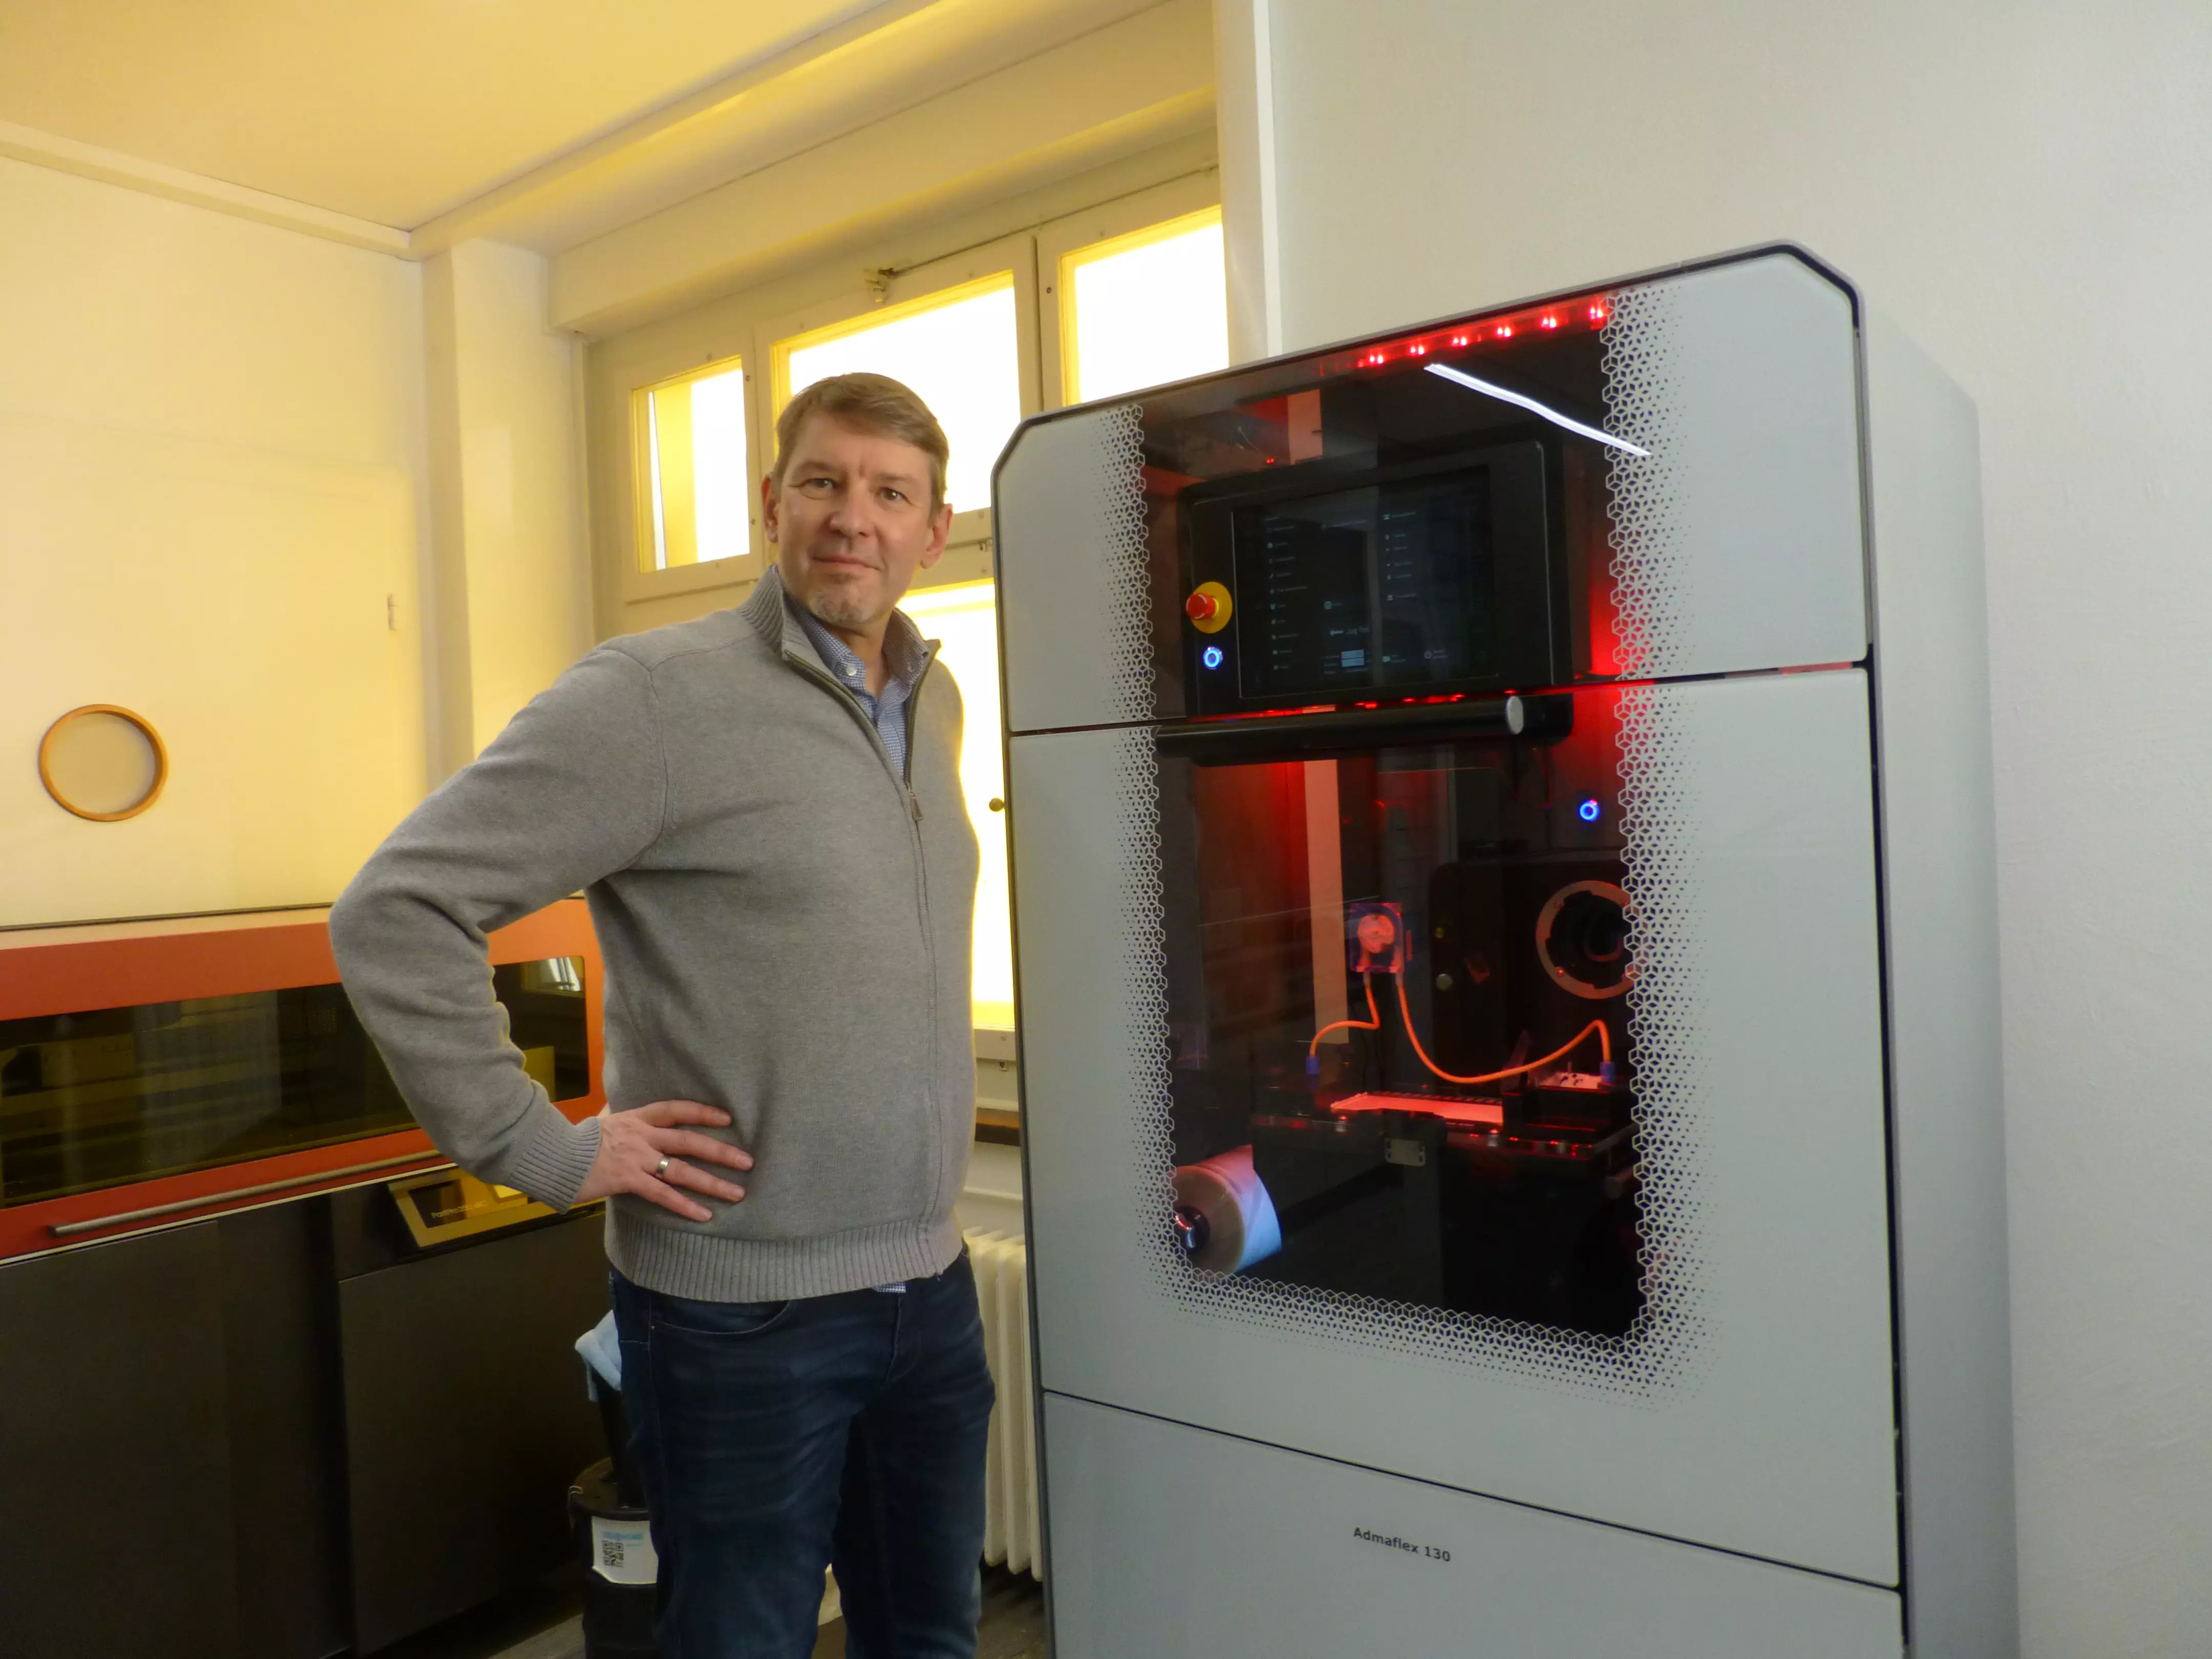 Prof. Dr. Dirk Penner next to the new DLP printer, enlarged view